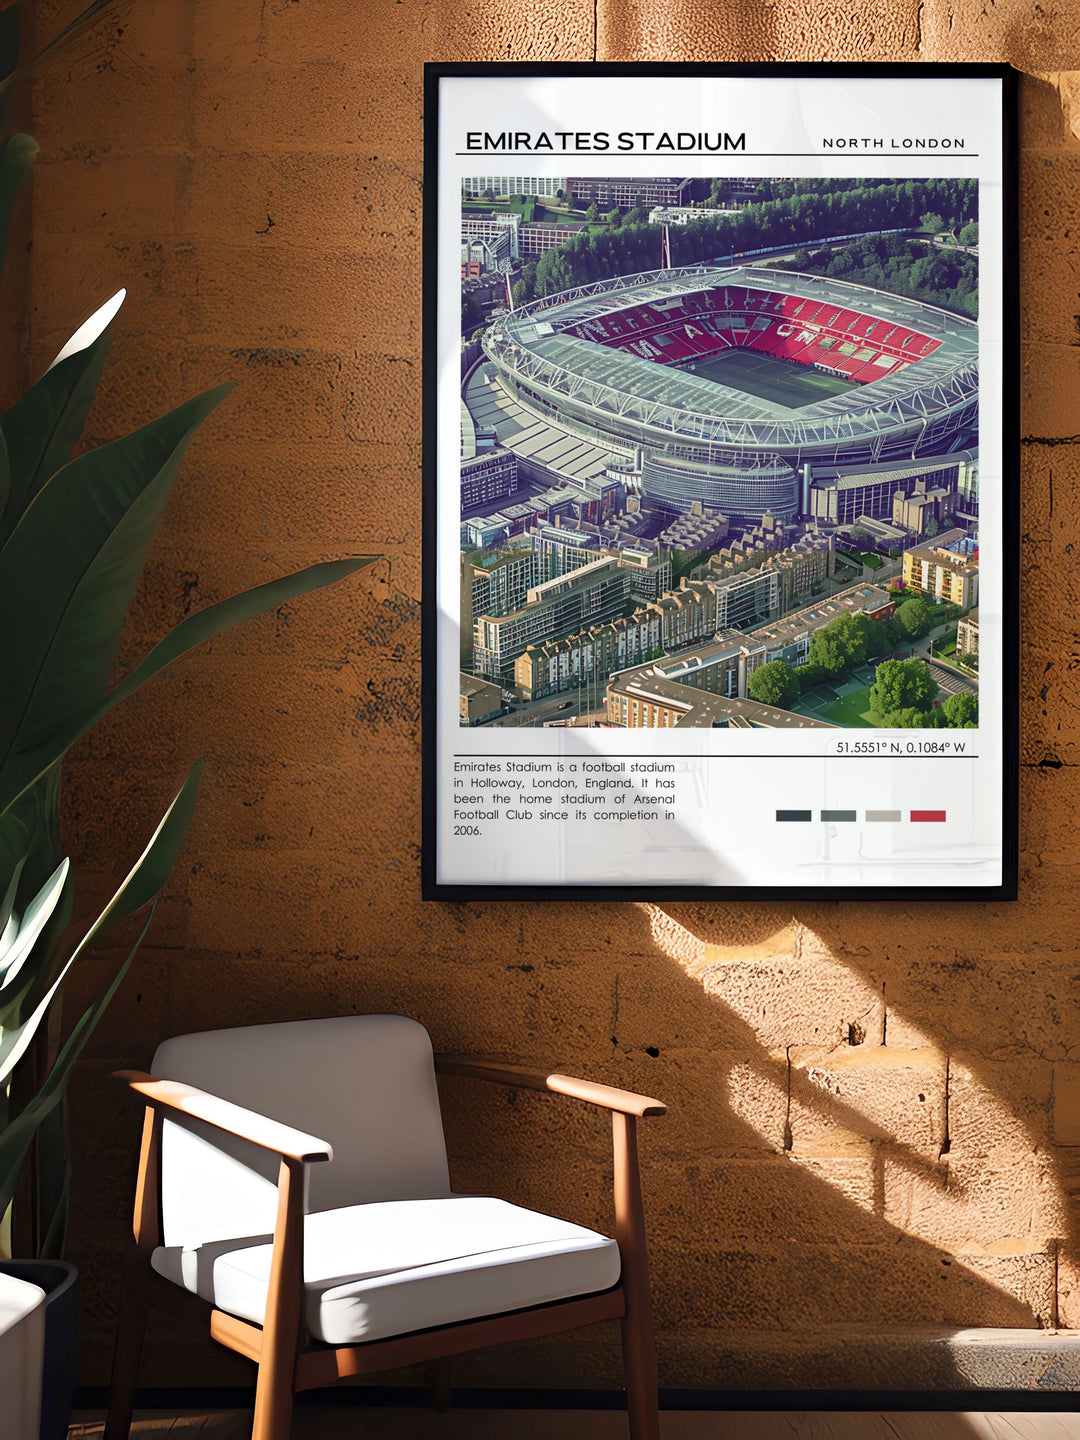 Home decor print illustrating Emirates Stadium, perfect for adding a touch of football heritage to any space.